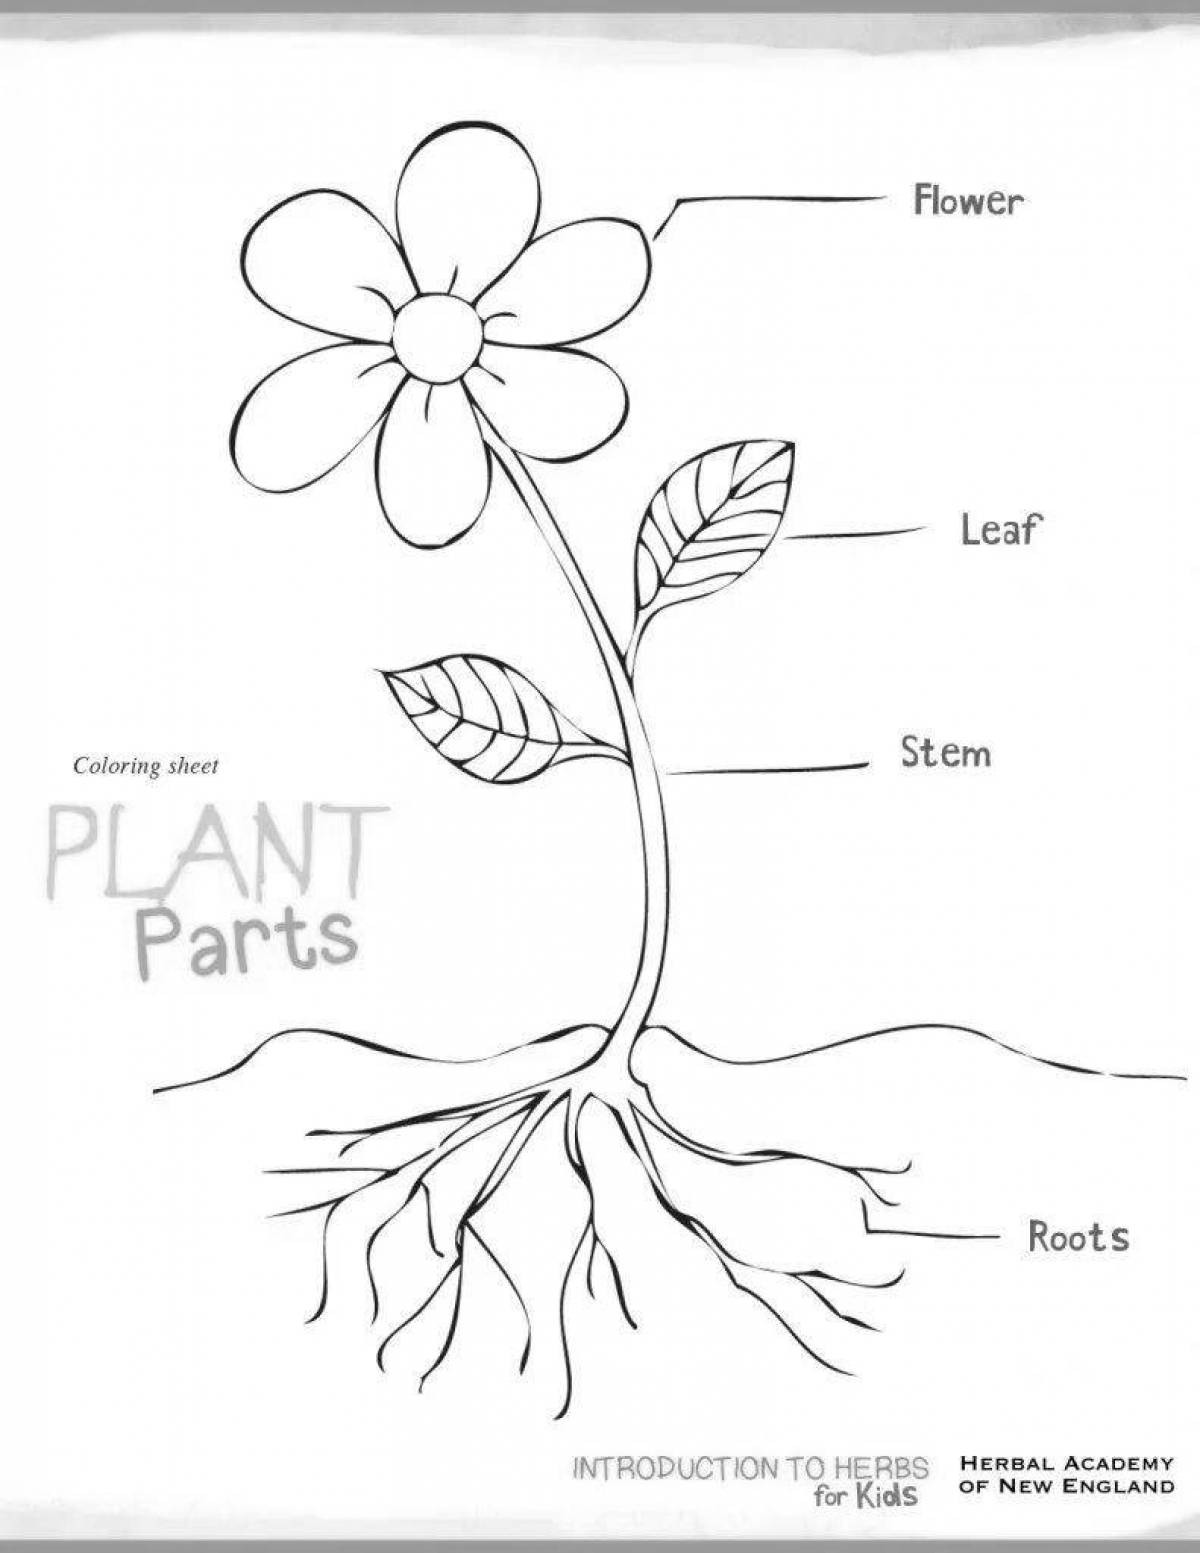 Creative plant parts for 1st grade kids